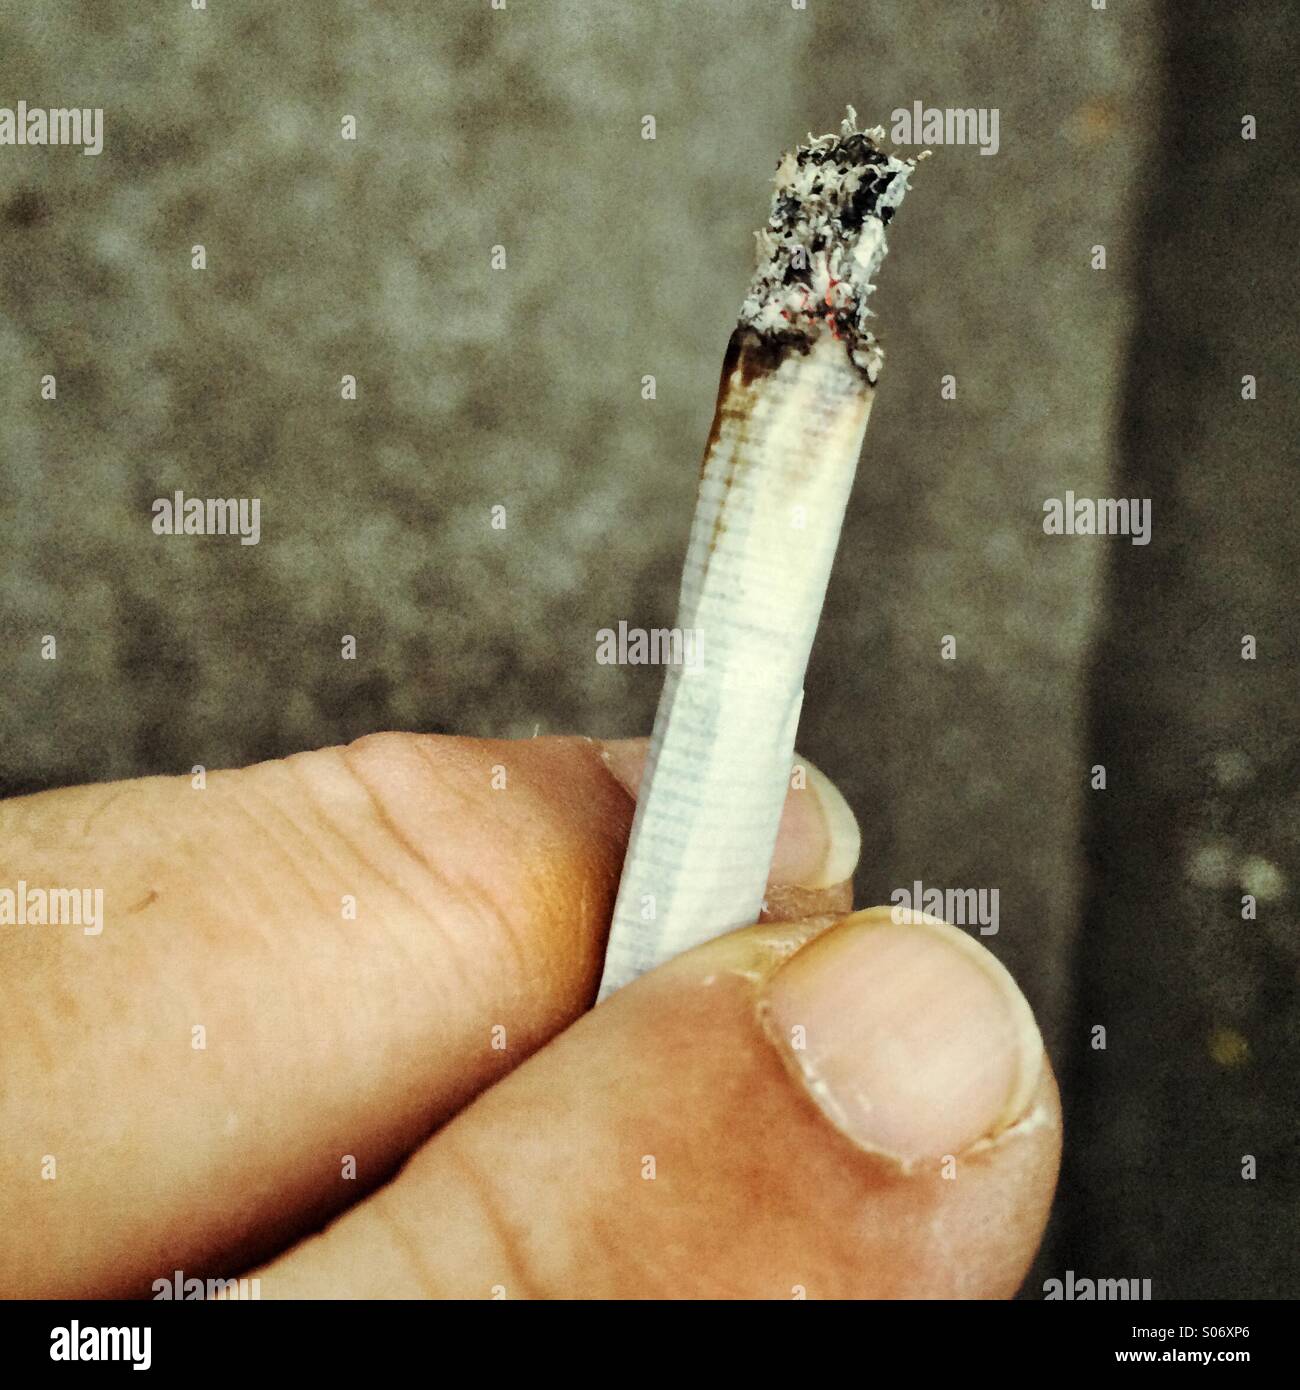 Smoking a roll up cigarette Stock Photo